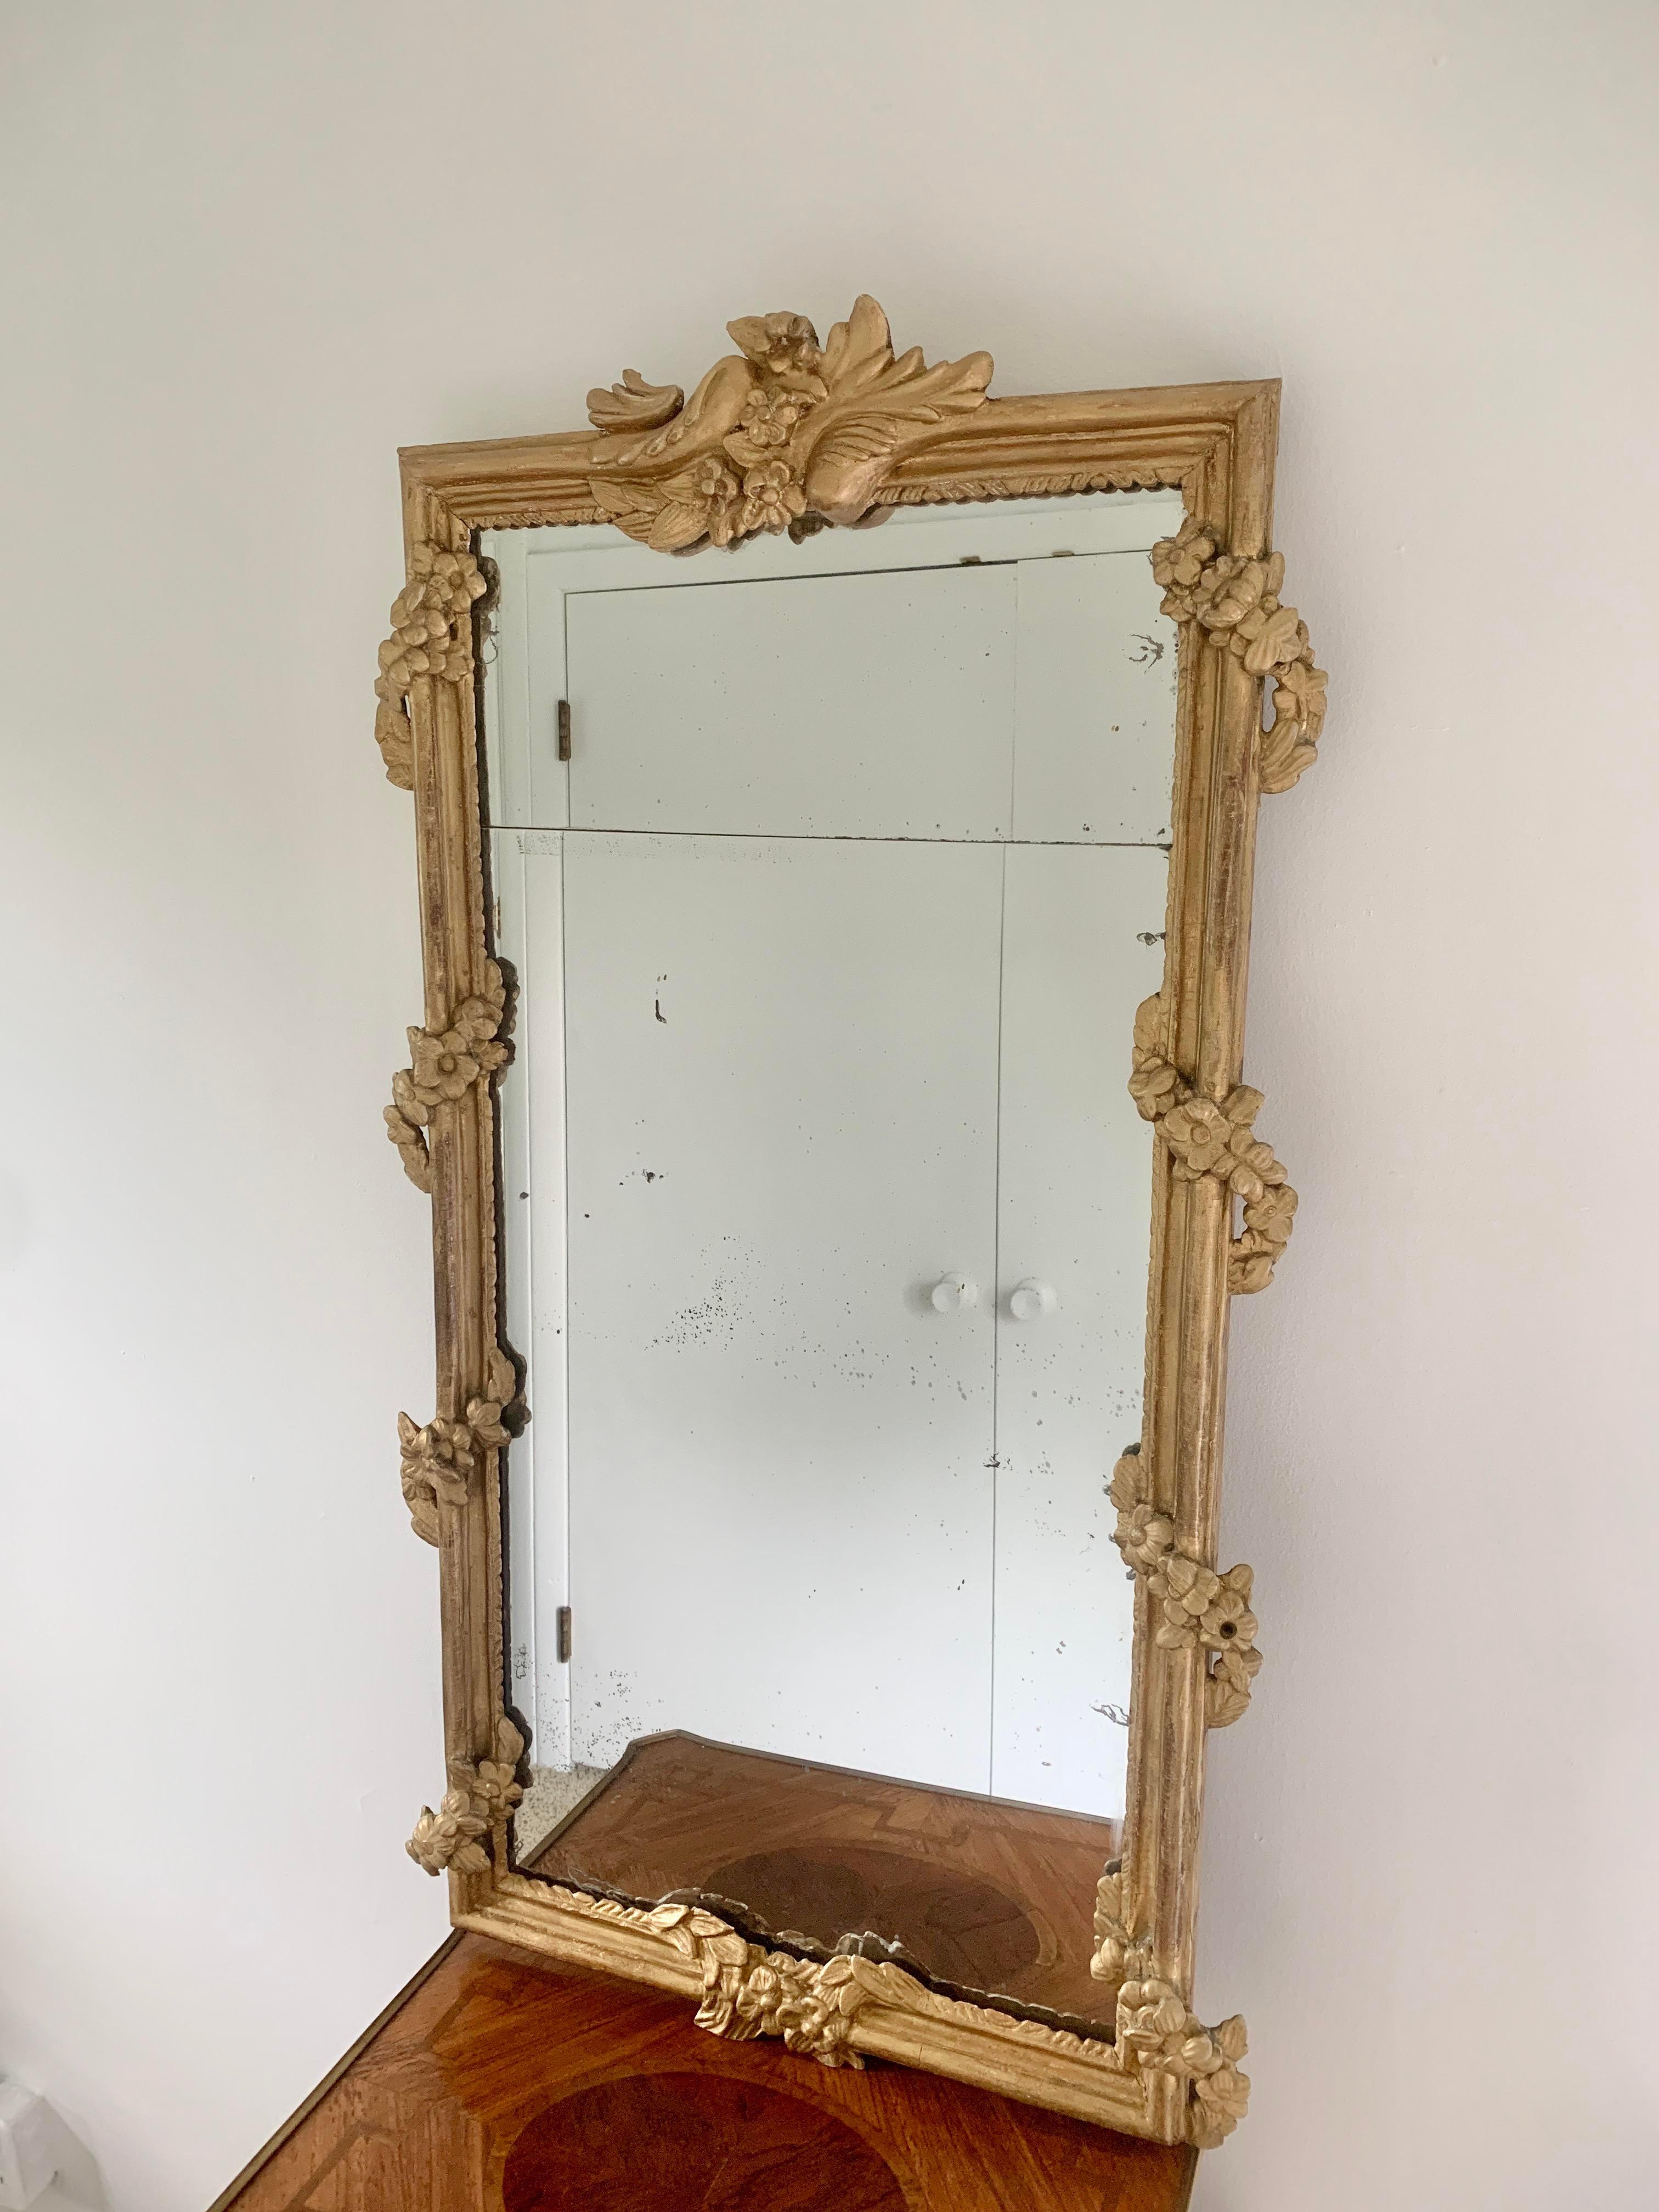 A beautiful early 19th century French split plate mirror set in a gilt wood frame. The frame is adorned with a gilt wood floral garland. The mirror is in good condition with age appropriate wear. 

France, Early 19th Century

Measures: 23.5ʺW × 3ʺD